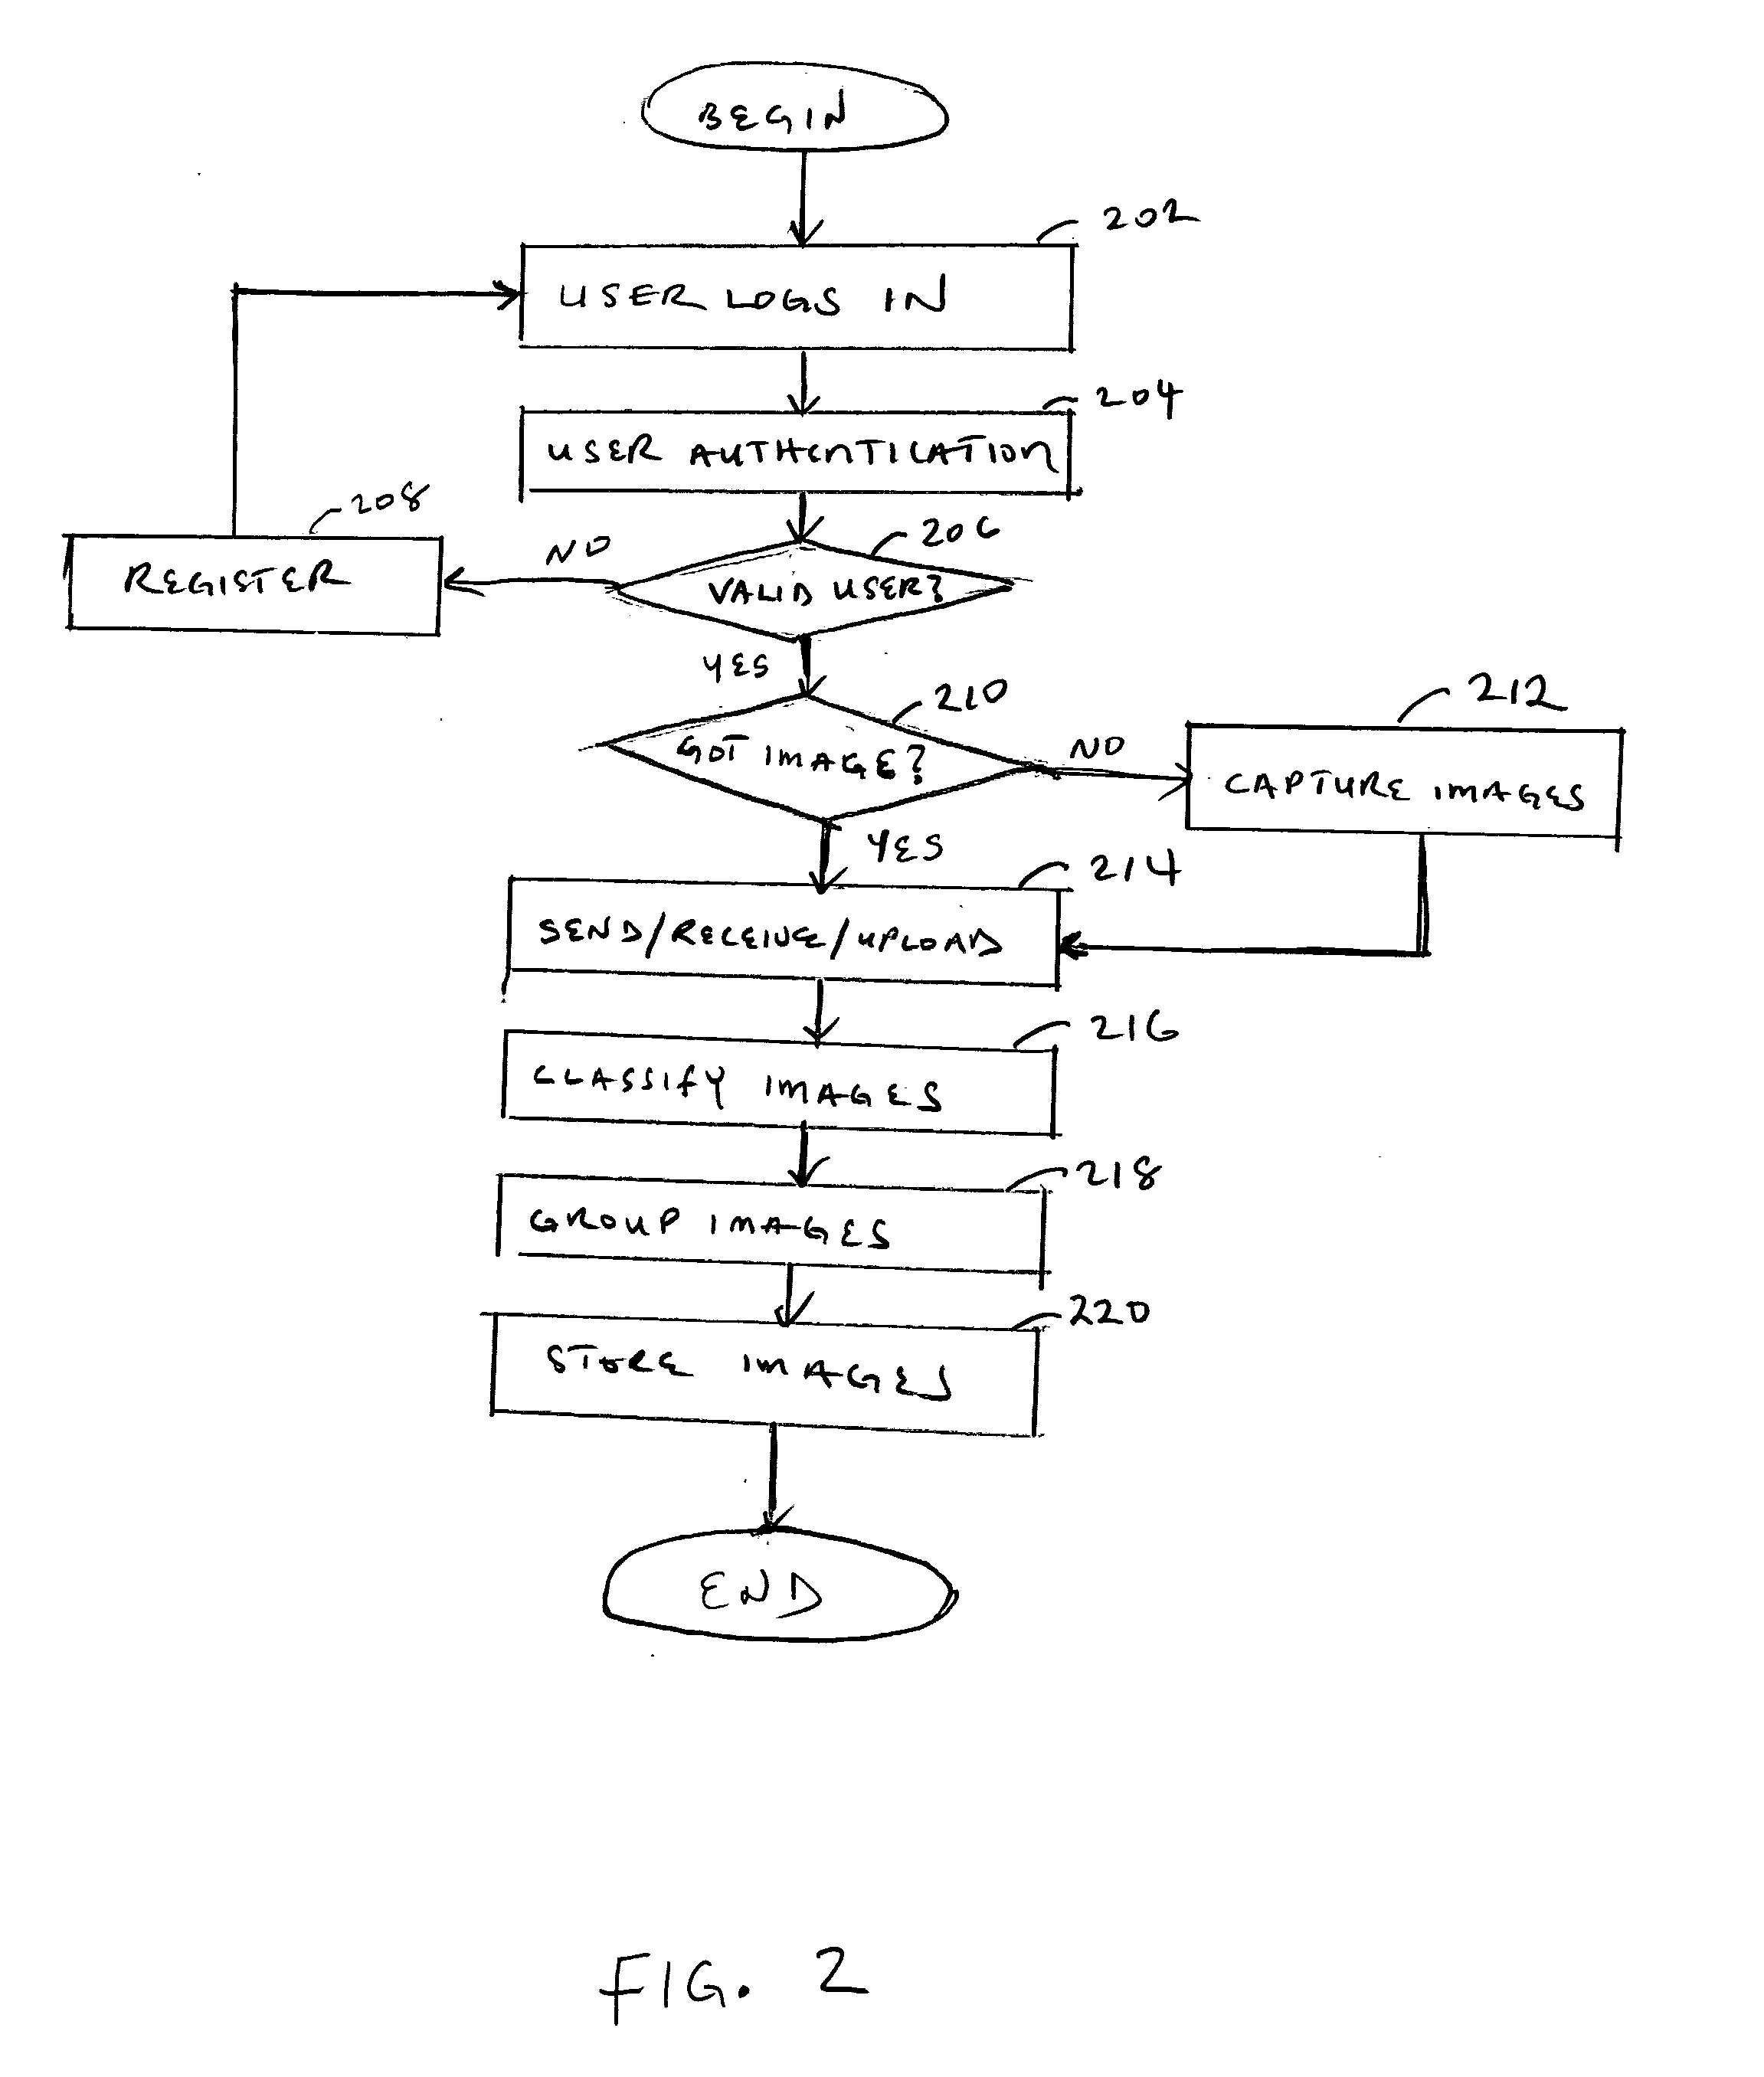 Online closet management and organizer system and method